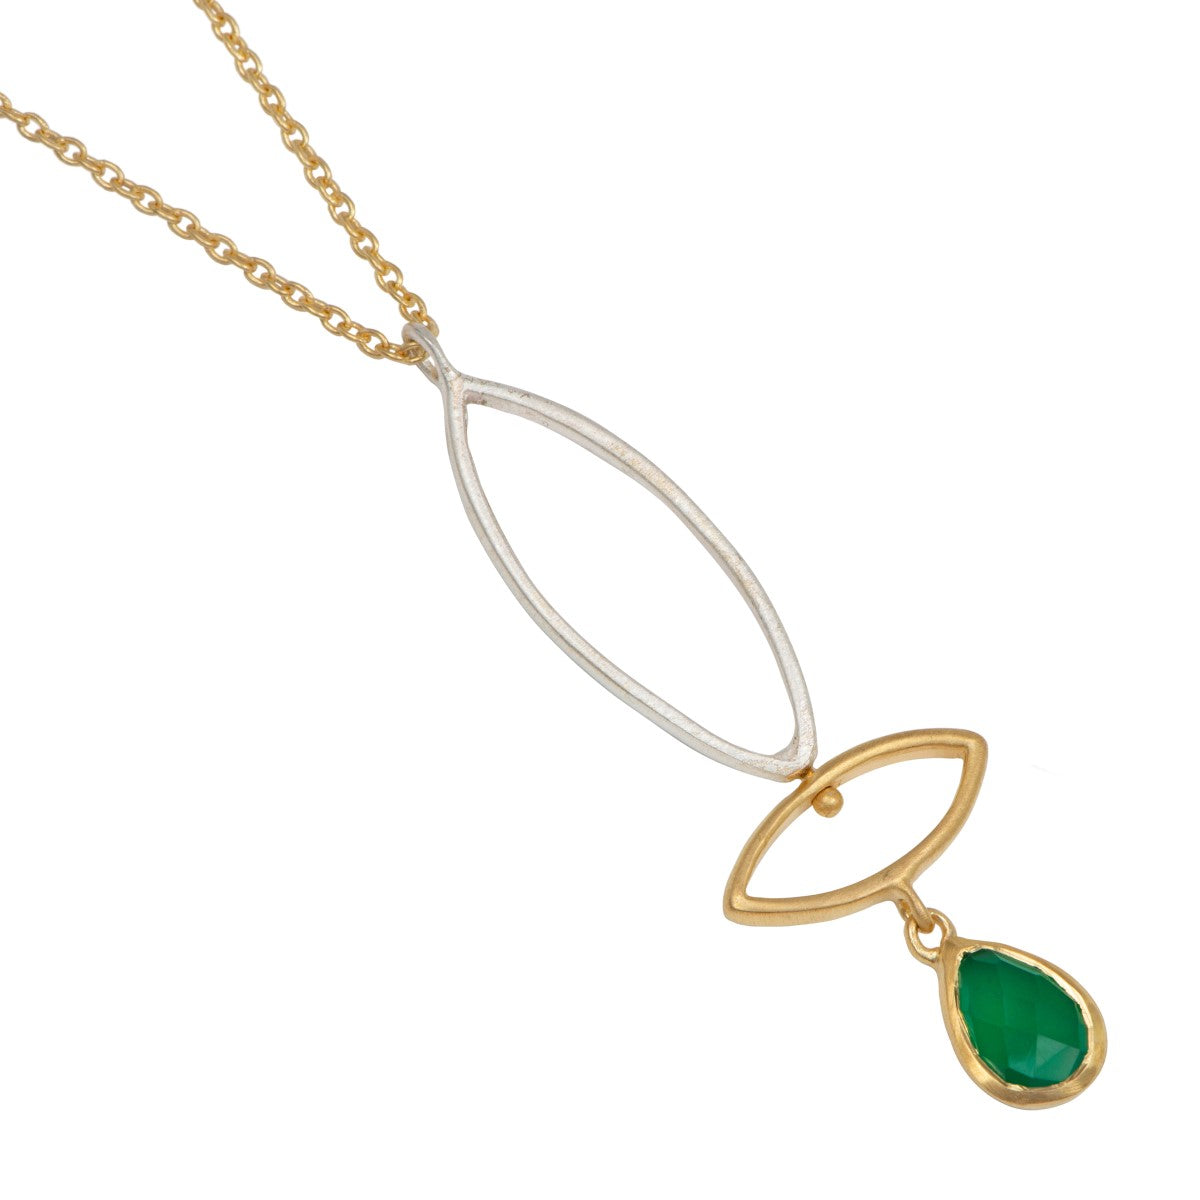 Green Onyx Gemstone Two Tone Pendant Necklace in Gold Plated Sterling Silver